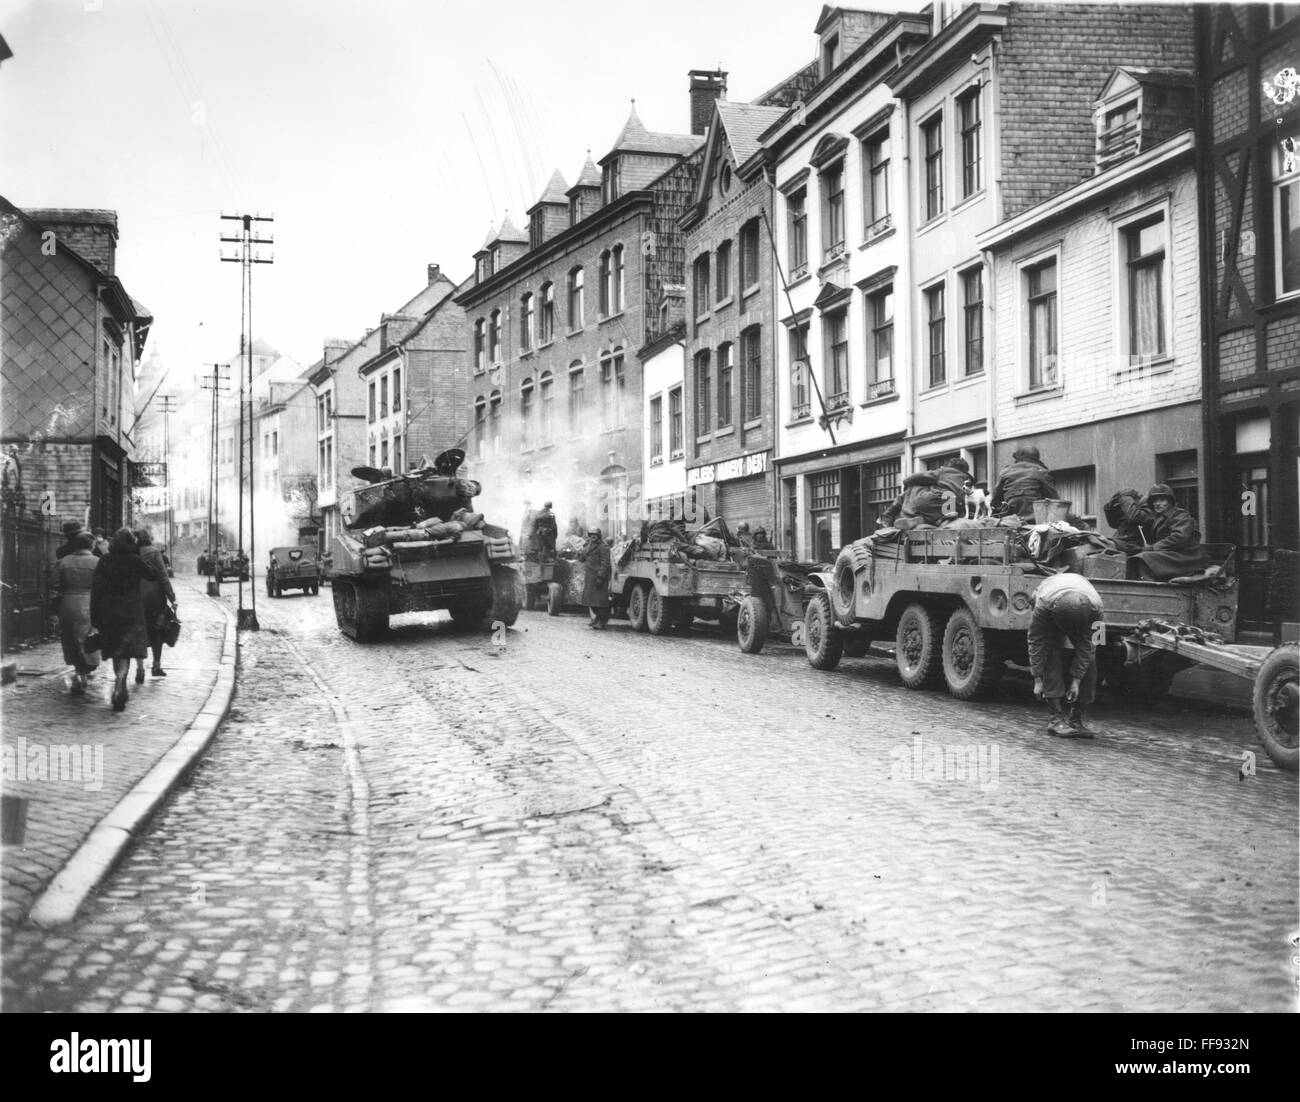 WWII: BELGIUM, 1944. /nEuropean Ground Combat. Tanks of the American First Army in the streets of Malmedy, Belgium, moving to help stem the strong German counter-offensive in the area, December 1944. Stock Photo